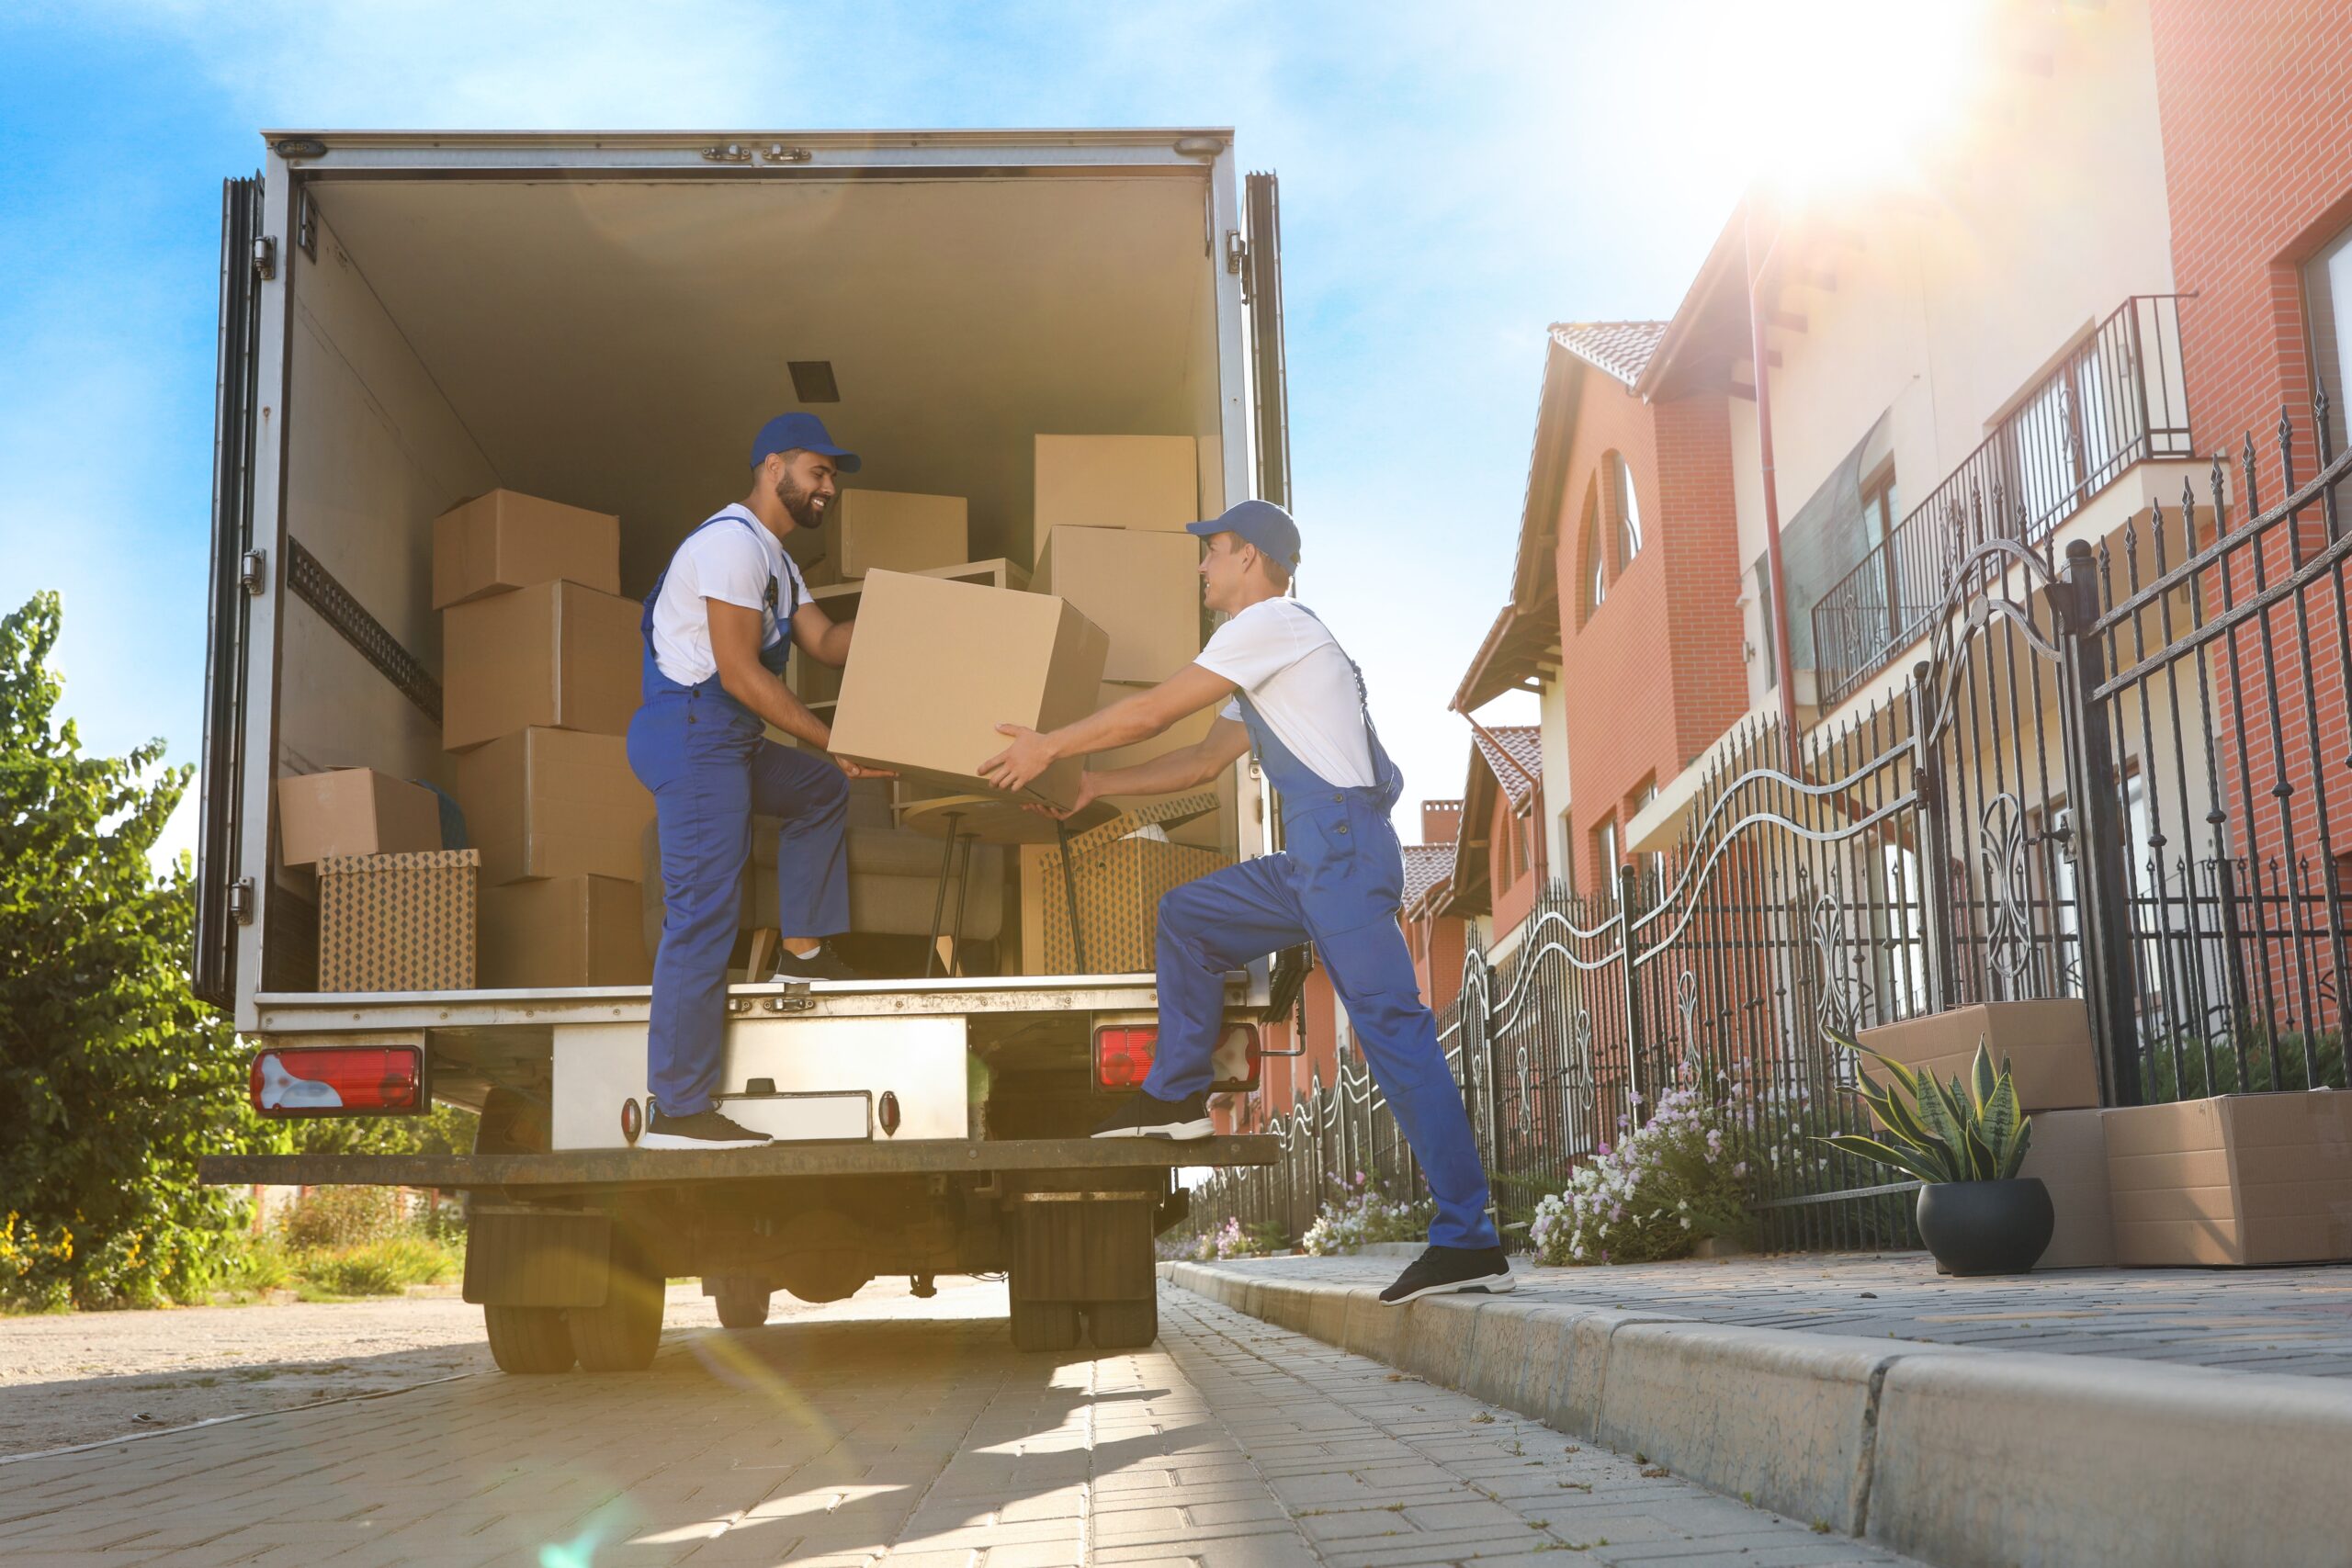 NRI provides quality corporate movers for household goods relocation